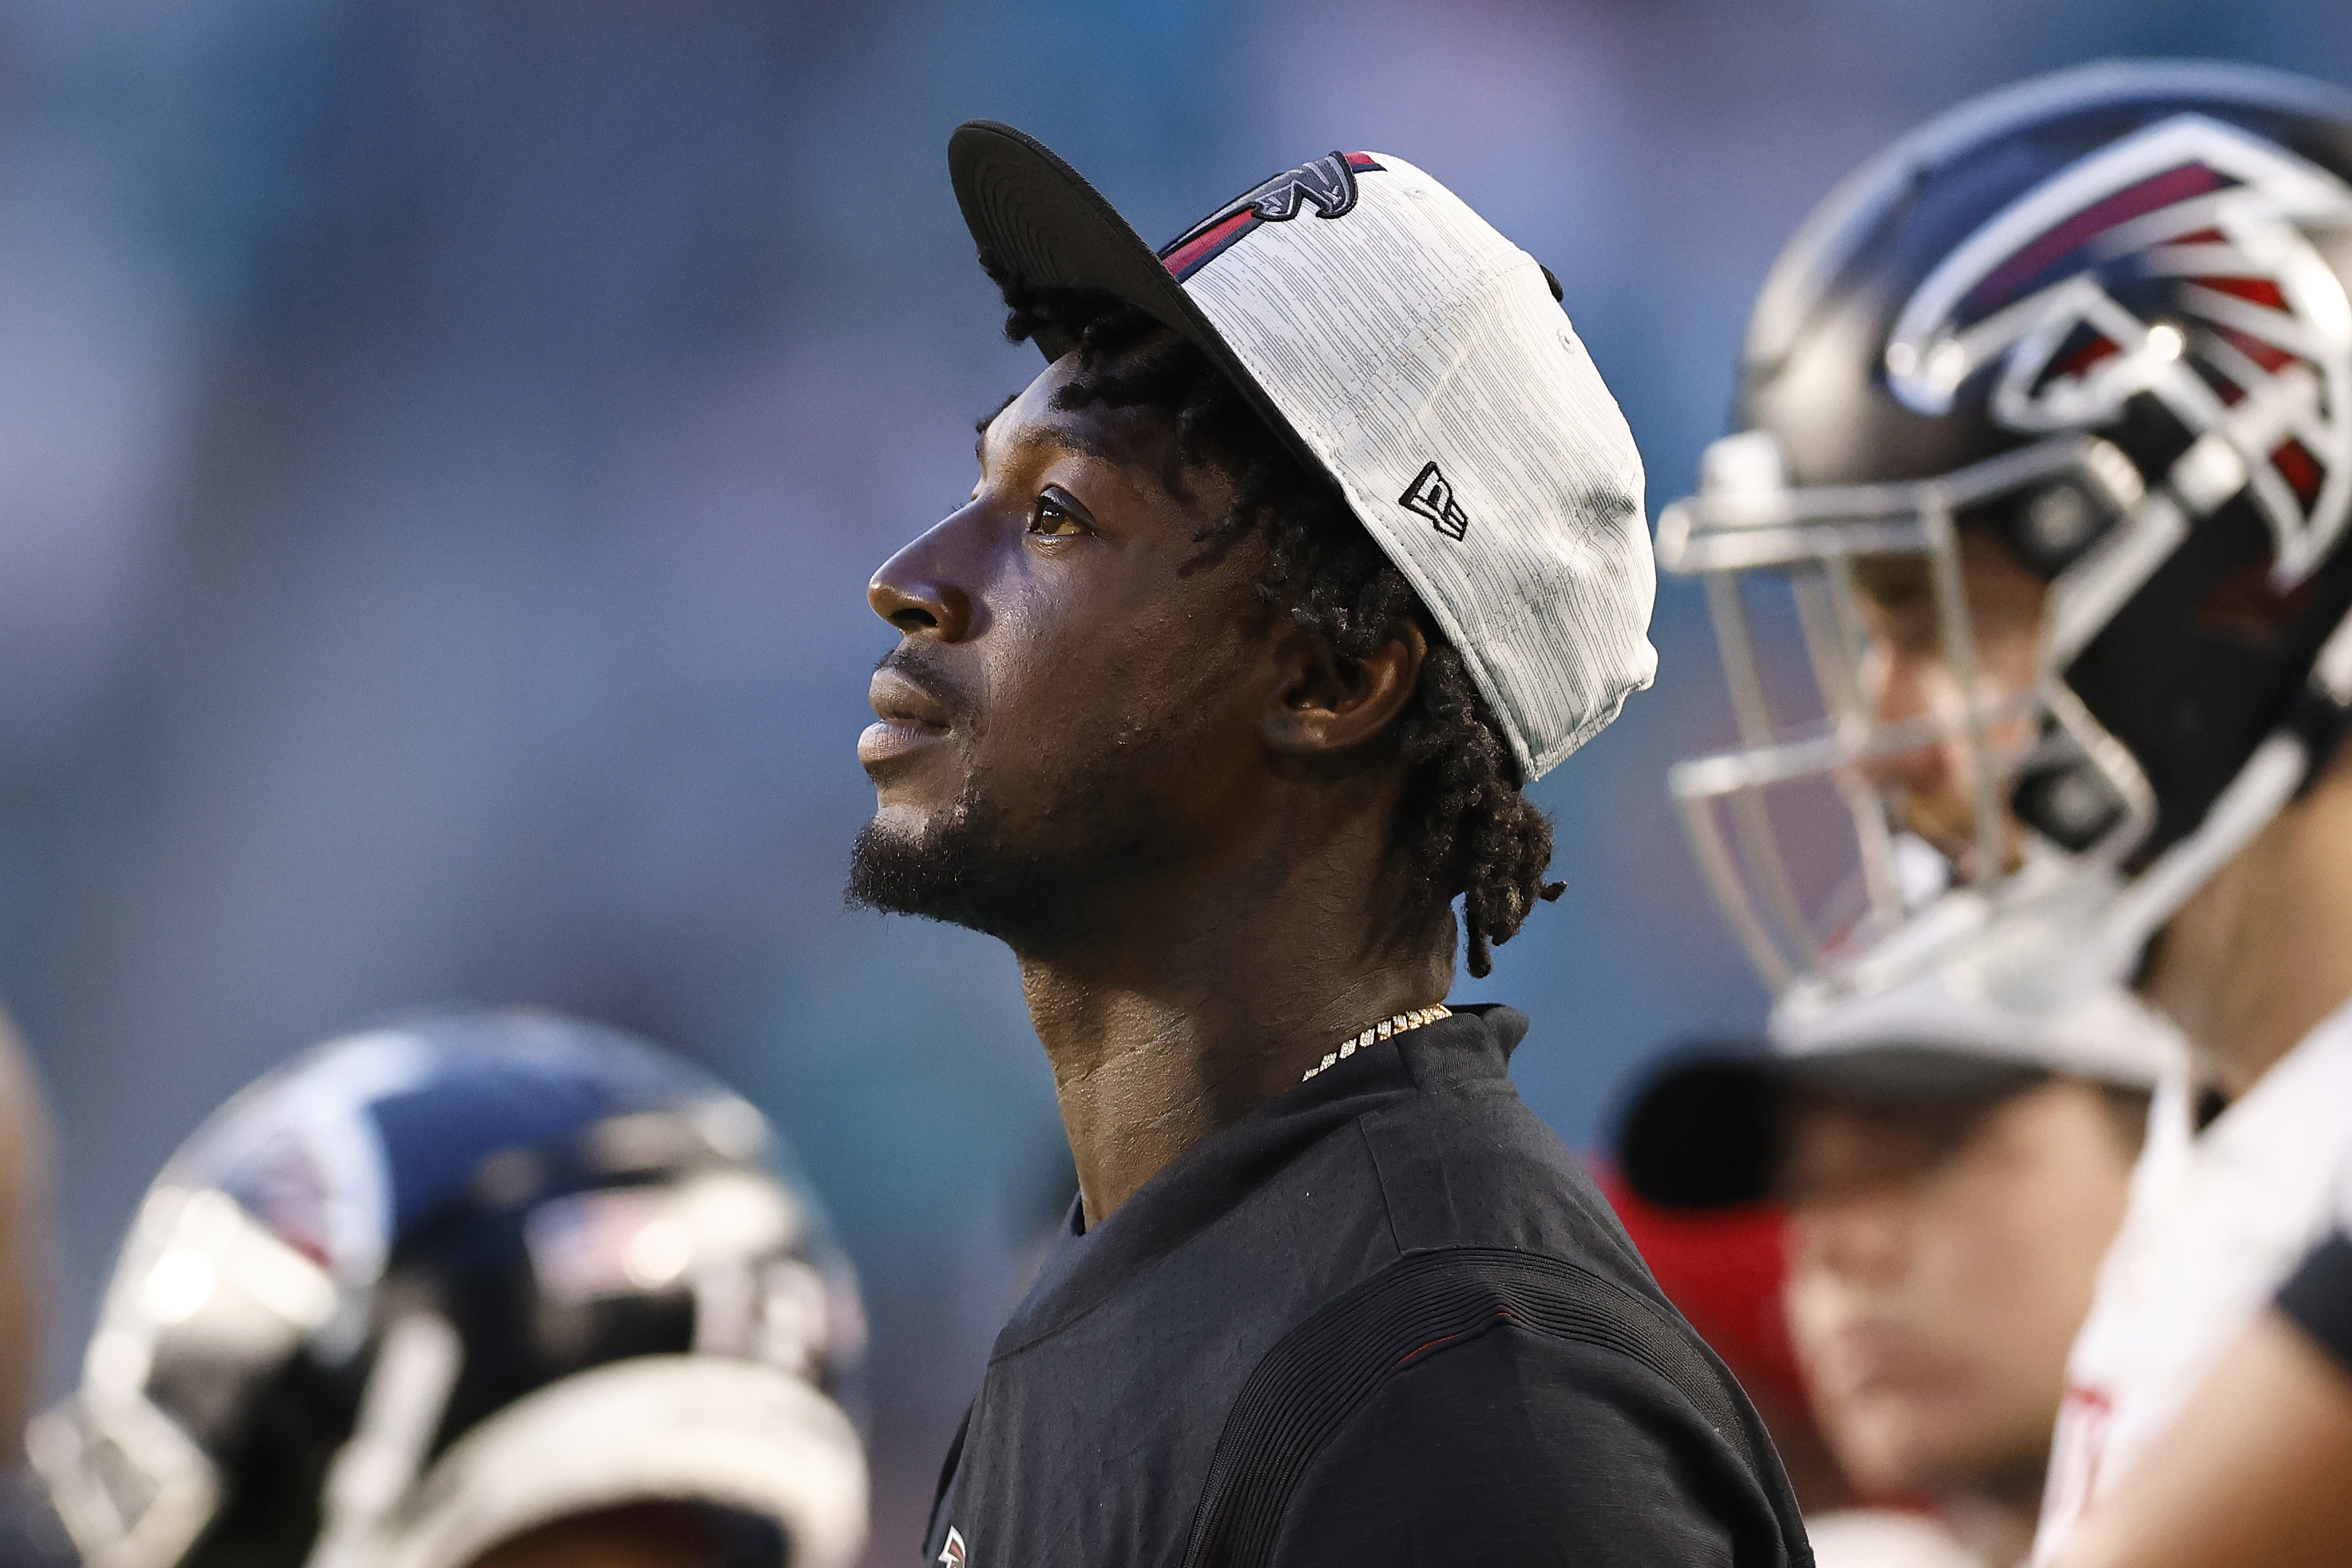 Falcons WR Calvin Ridley got suspended for betting.